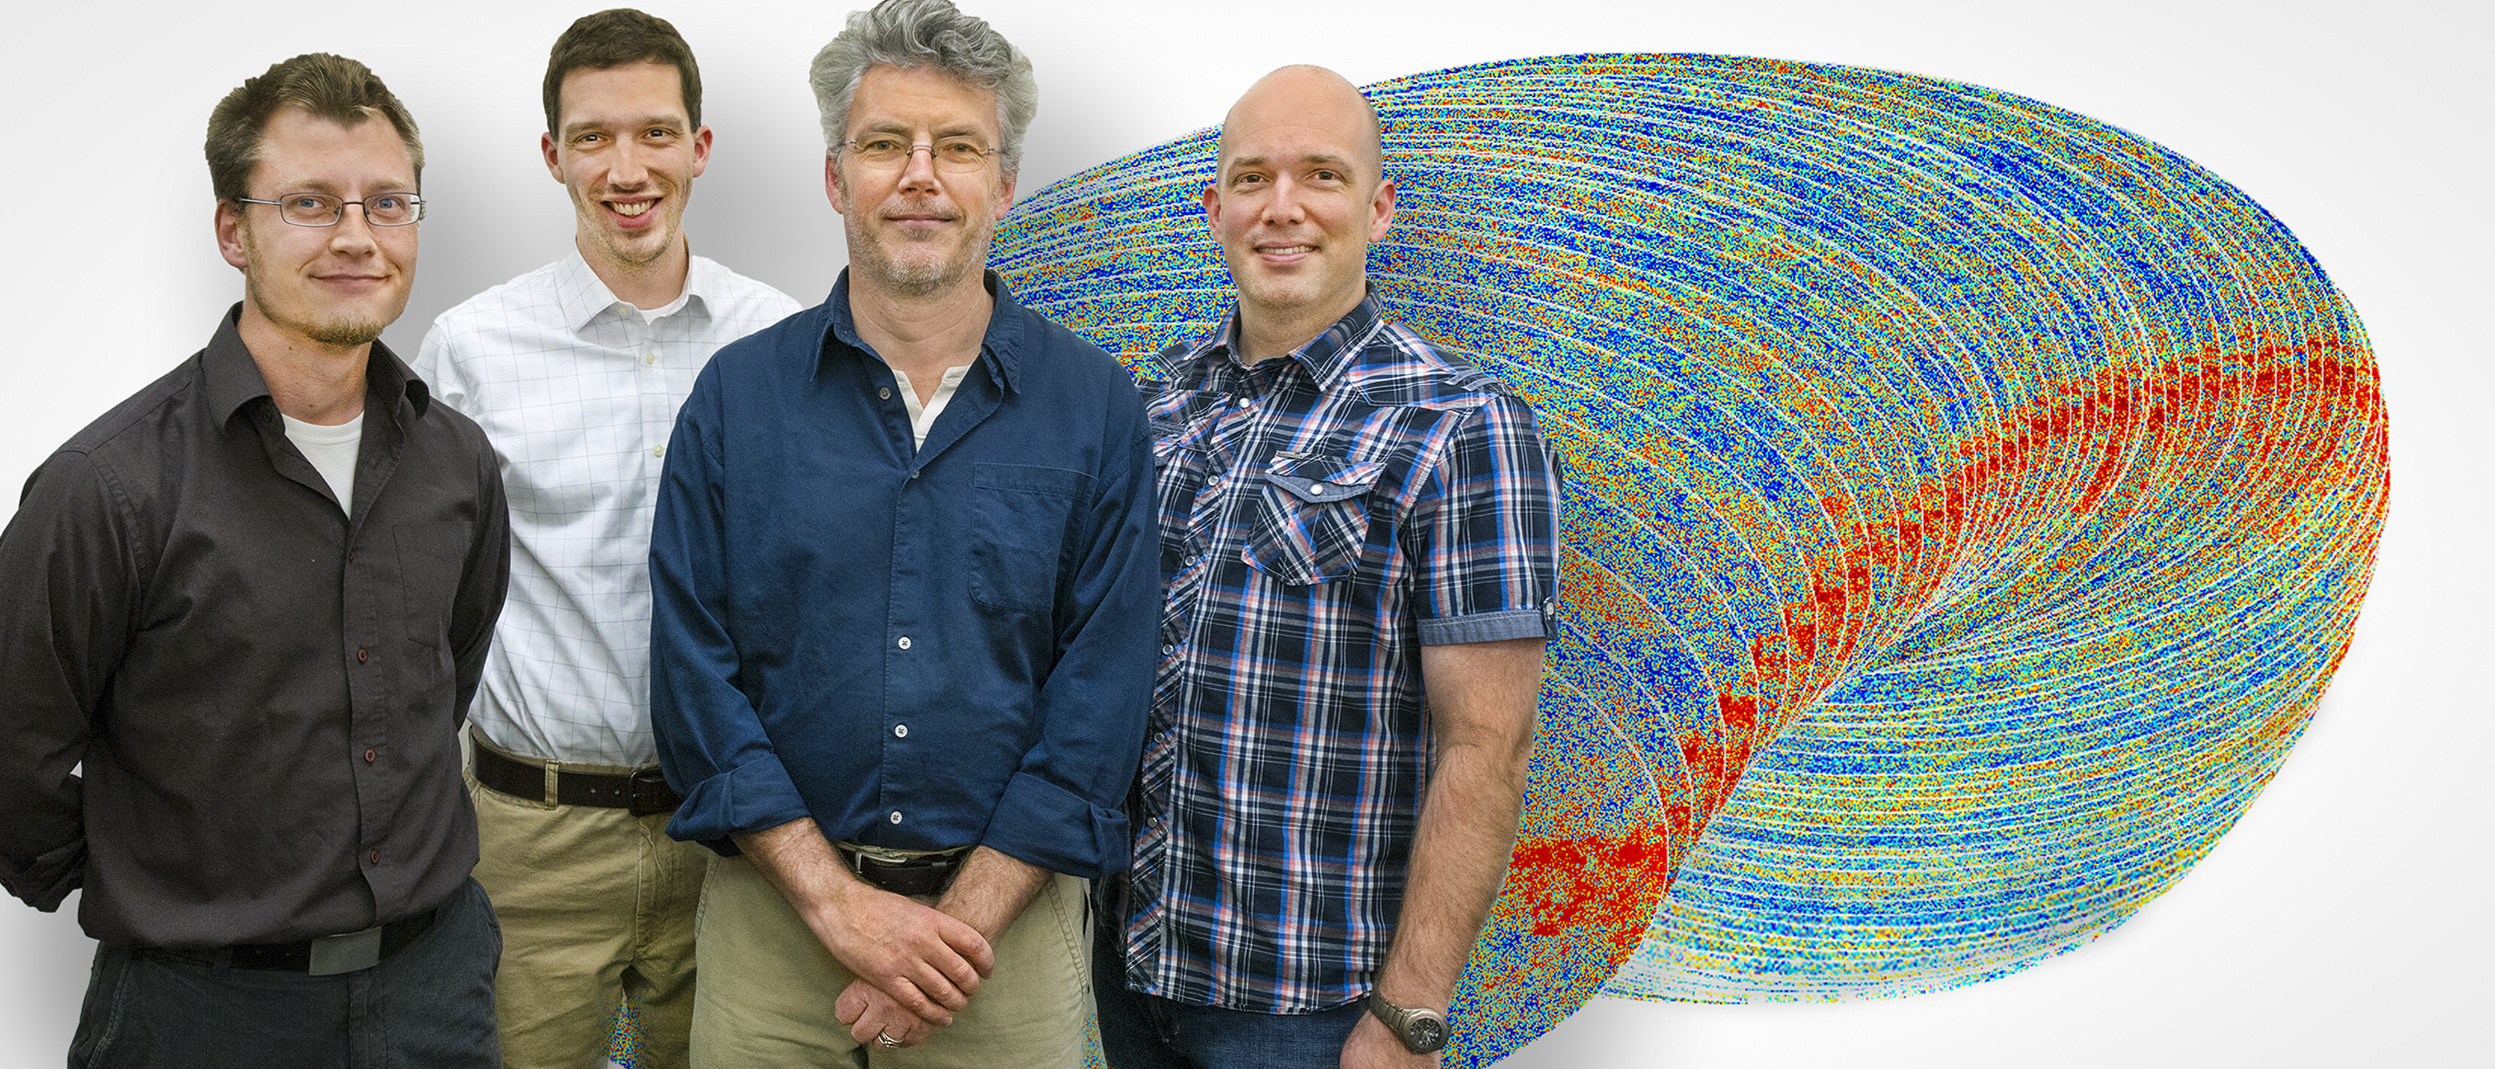 Photo - The Planck analysis group with CMB Planck data images. From left to right: Reijo Keskitalo, Aaron Collier, Julian Borrill and Ted Kisner. (Credit: Roy Kaltschmidt/Berkeley Lab)